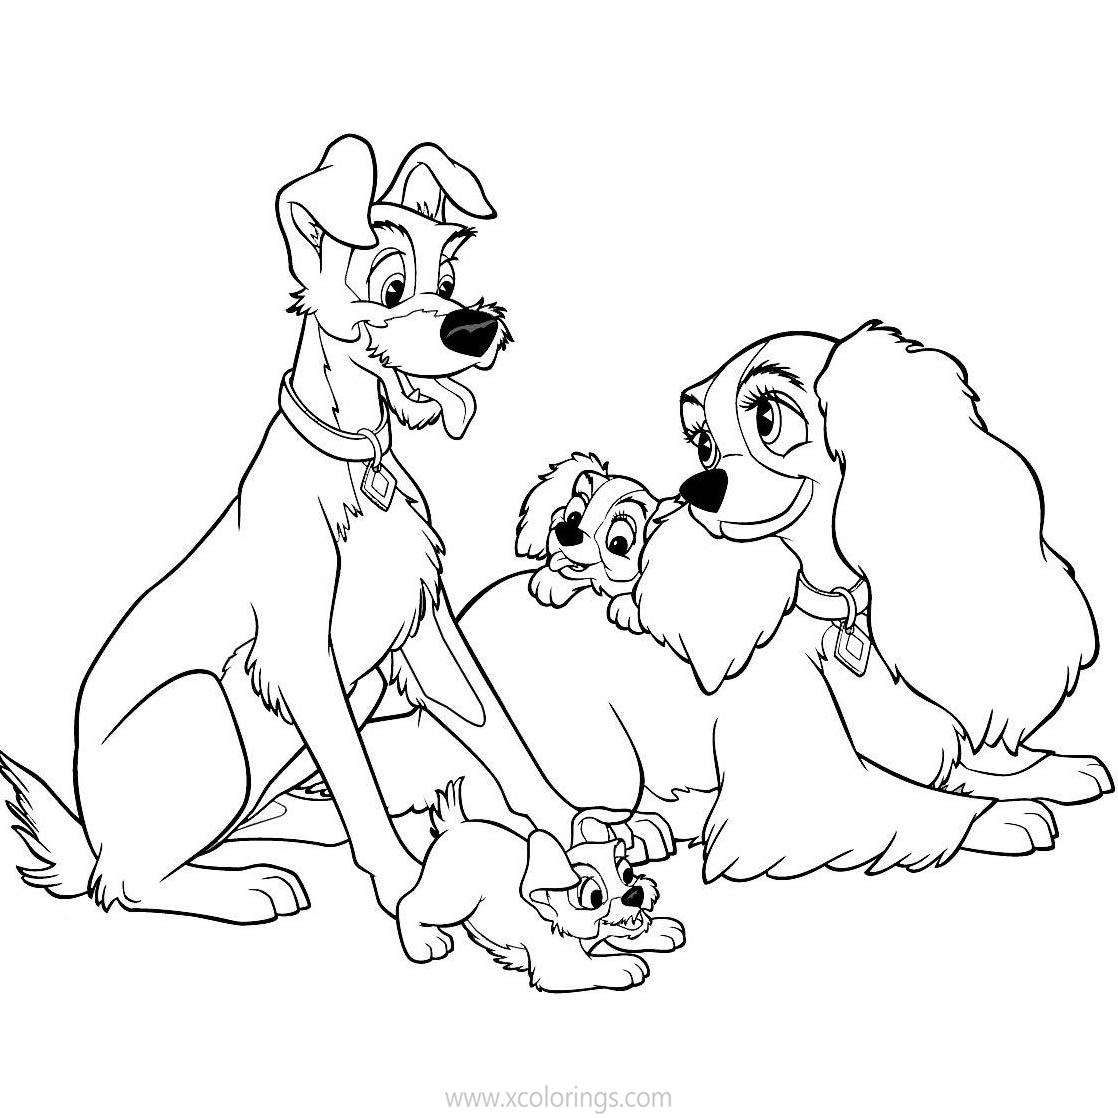 Free Family of Lady and the Tramp Coloring Pages printable